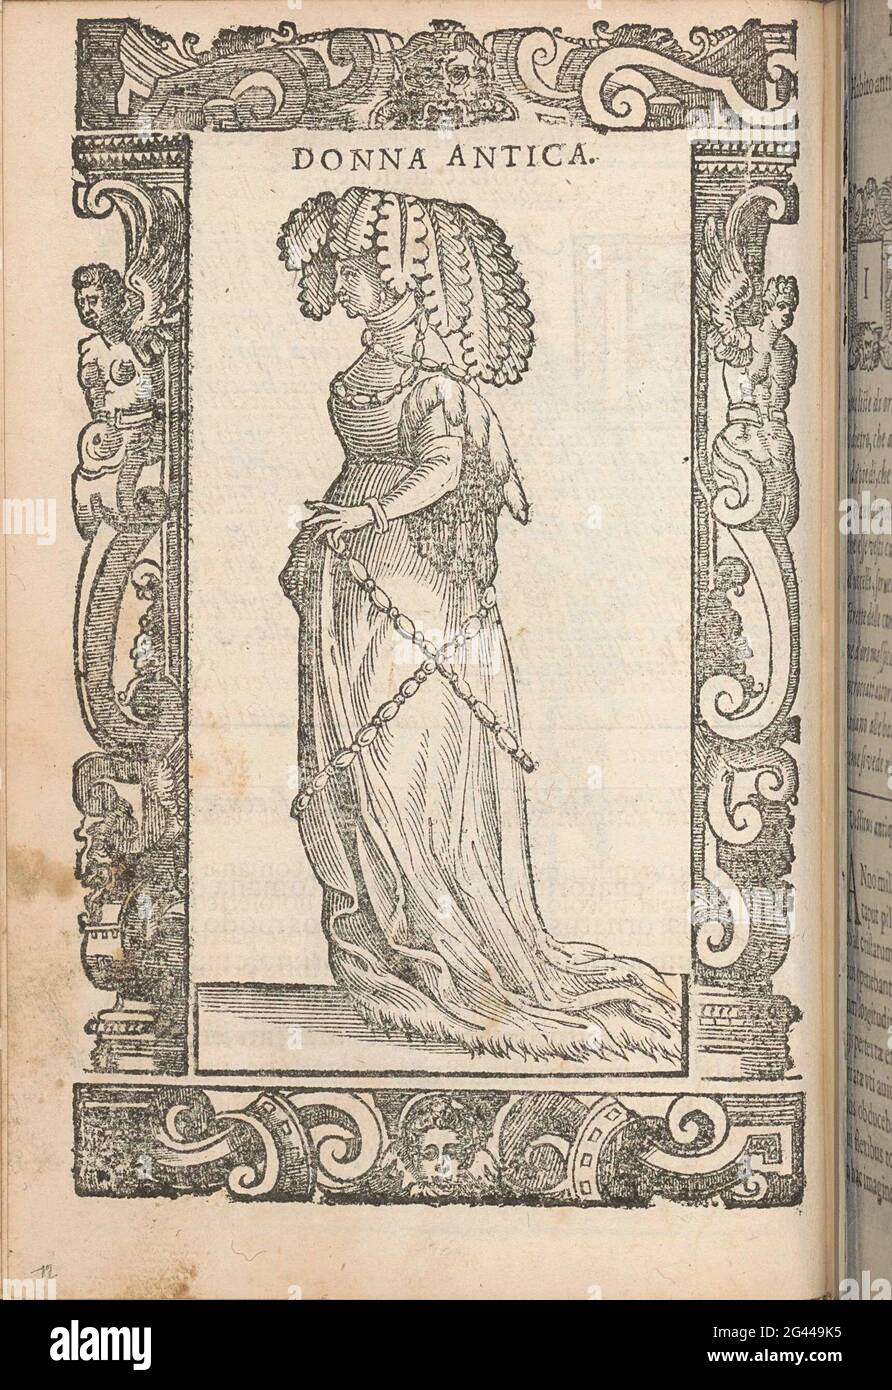 Woman from Rome in The Year 1000 Clothing; Ancient woman; Ancient habits, modern and modernisms around the world: new accesses of many figures: dressetus antiquorum, recentorumque totius orbis. Woman in Roman costume Behaving According to Vecellio. 1000 Balance. On the Head of her at Hood With Ormesino Strips (Sort of Silk) in The Form of Leaves. Golden Necklaces Around The Neck of her. To Drawing of the Miniature Painter Giovan Maria Bodovino. In Ornament Stock Photo